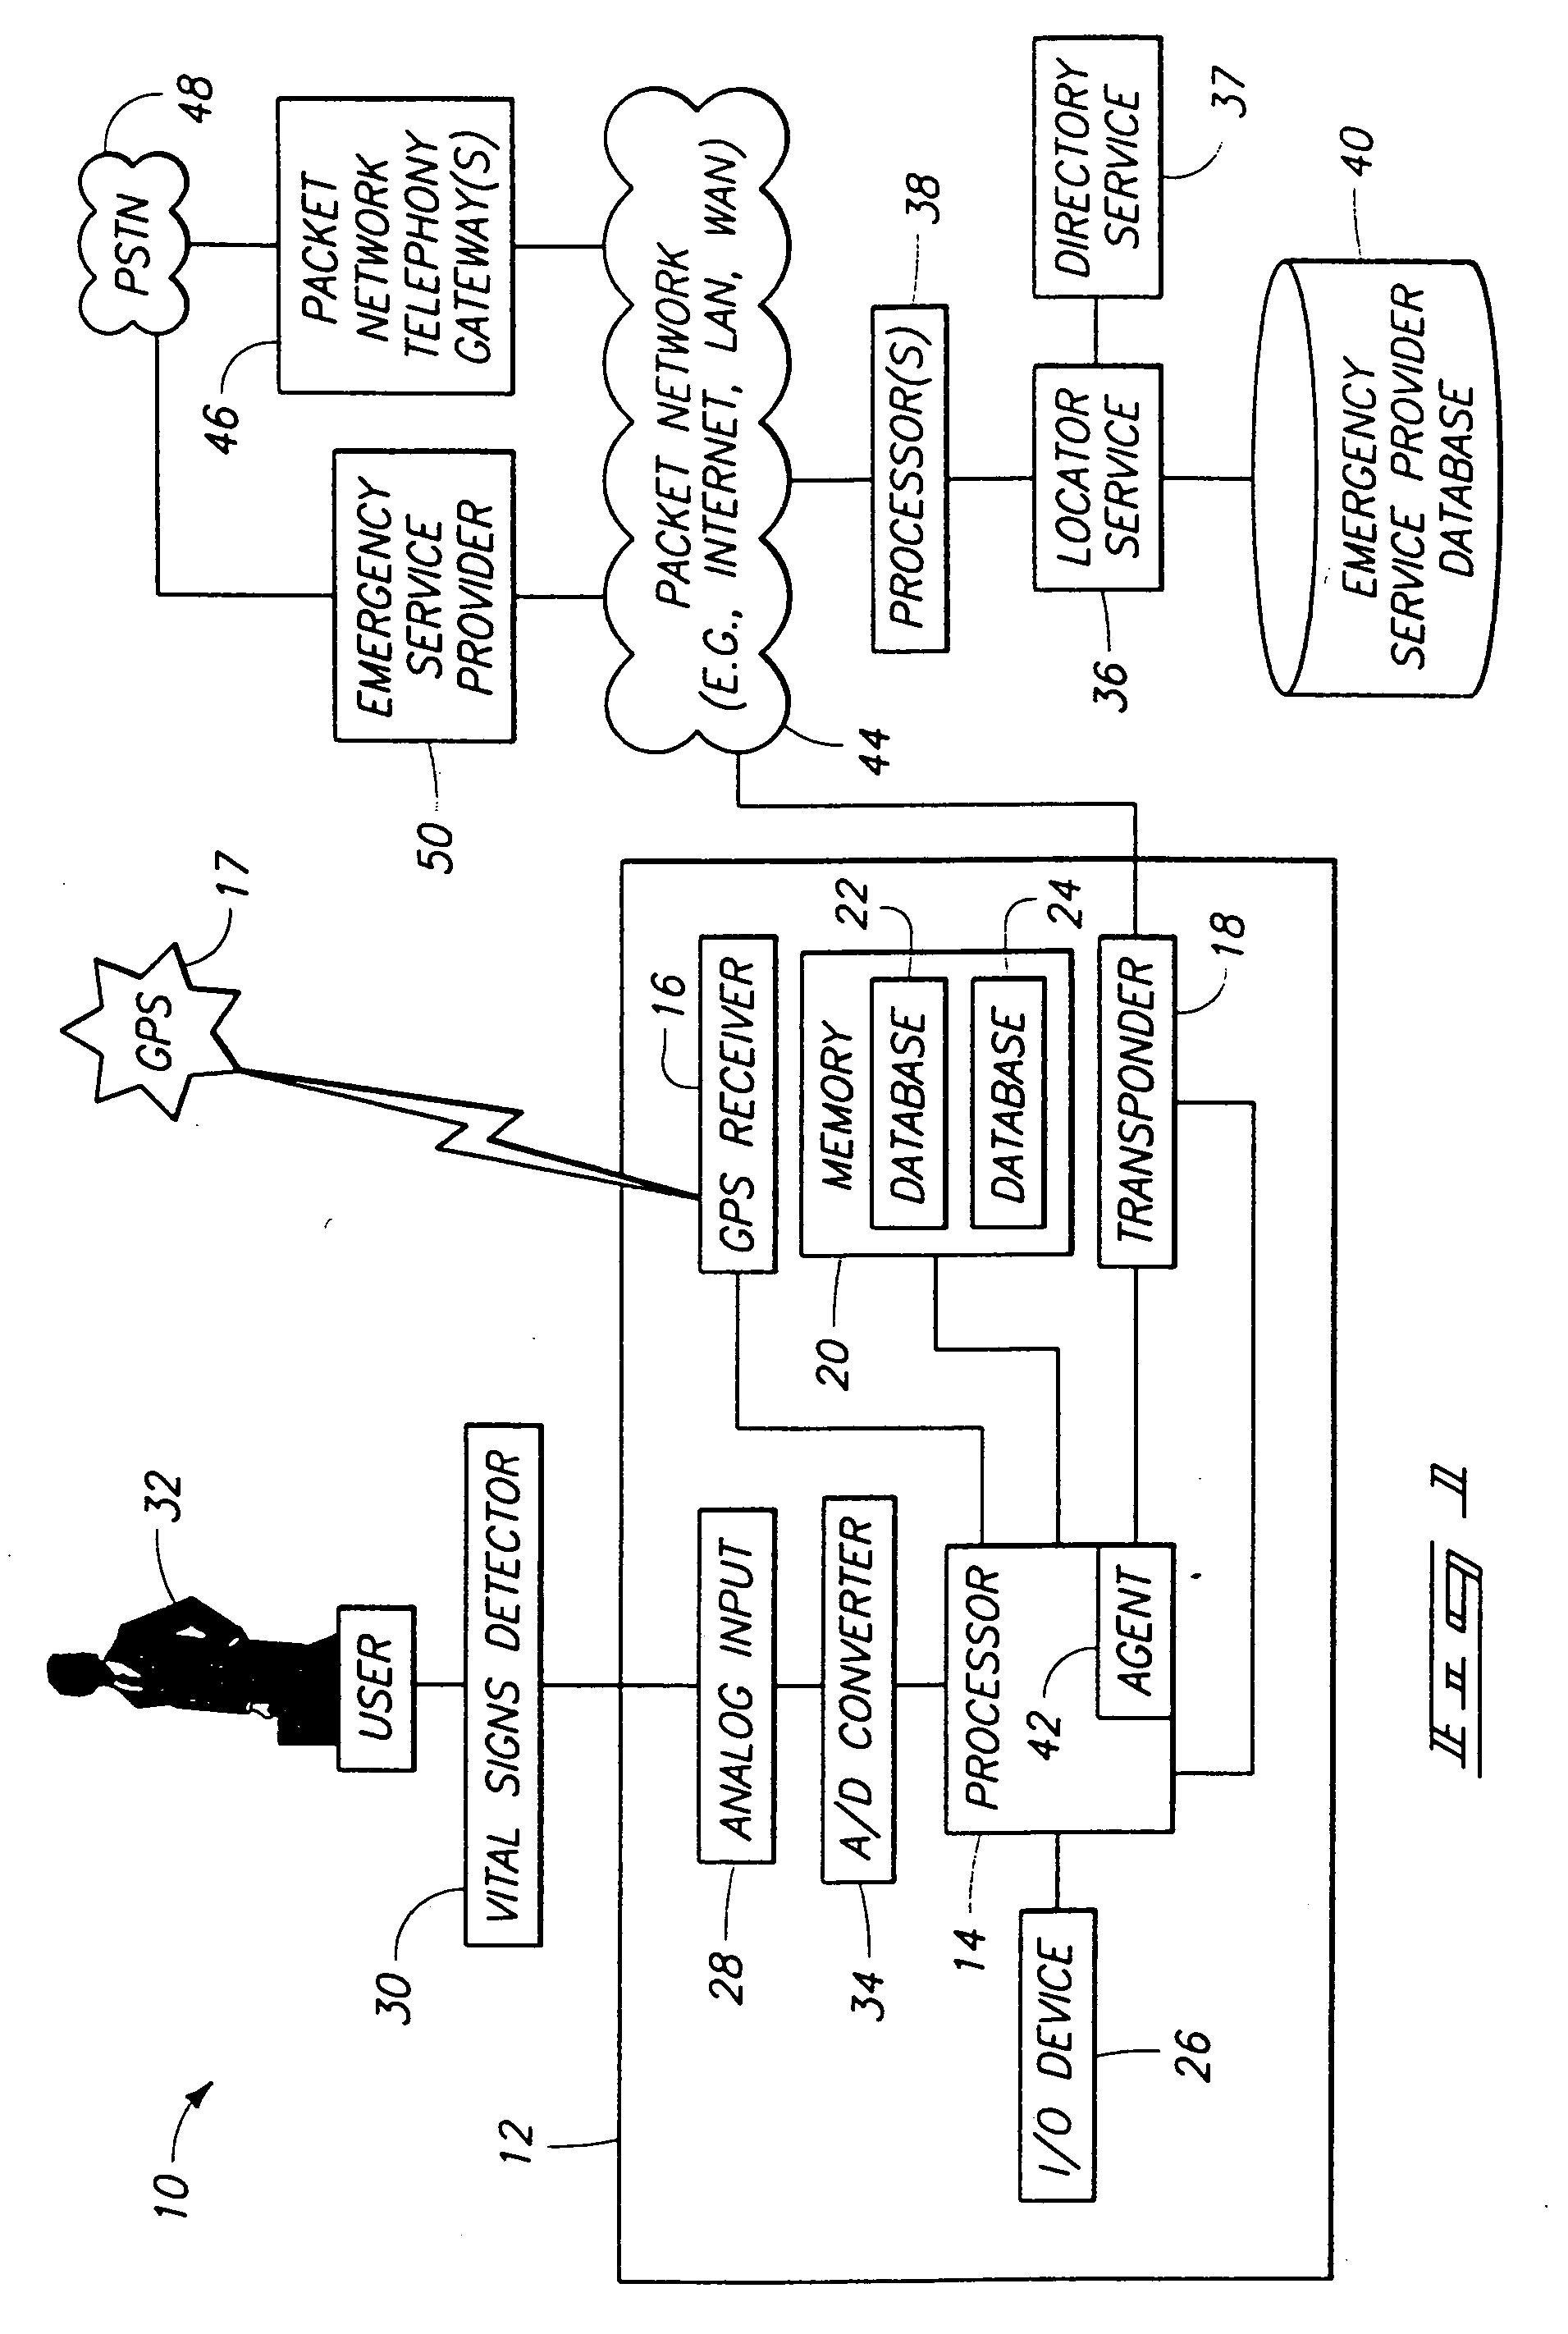 Mobile data device and method of locating mobile data service